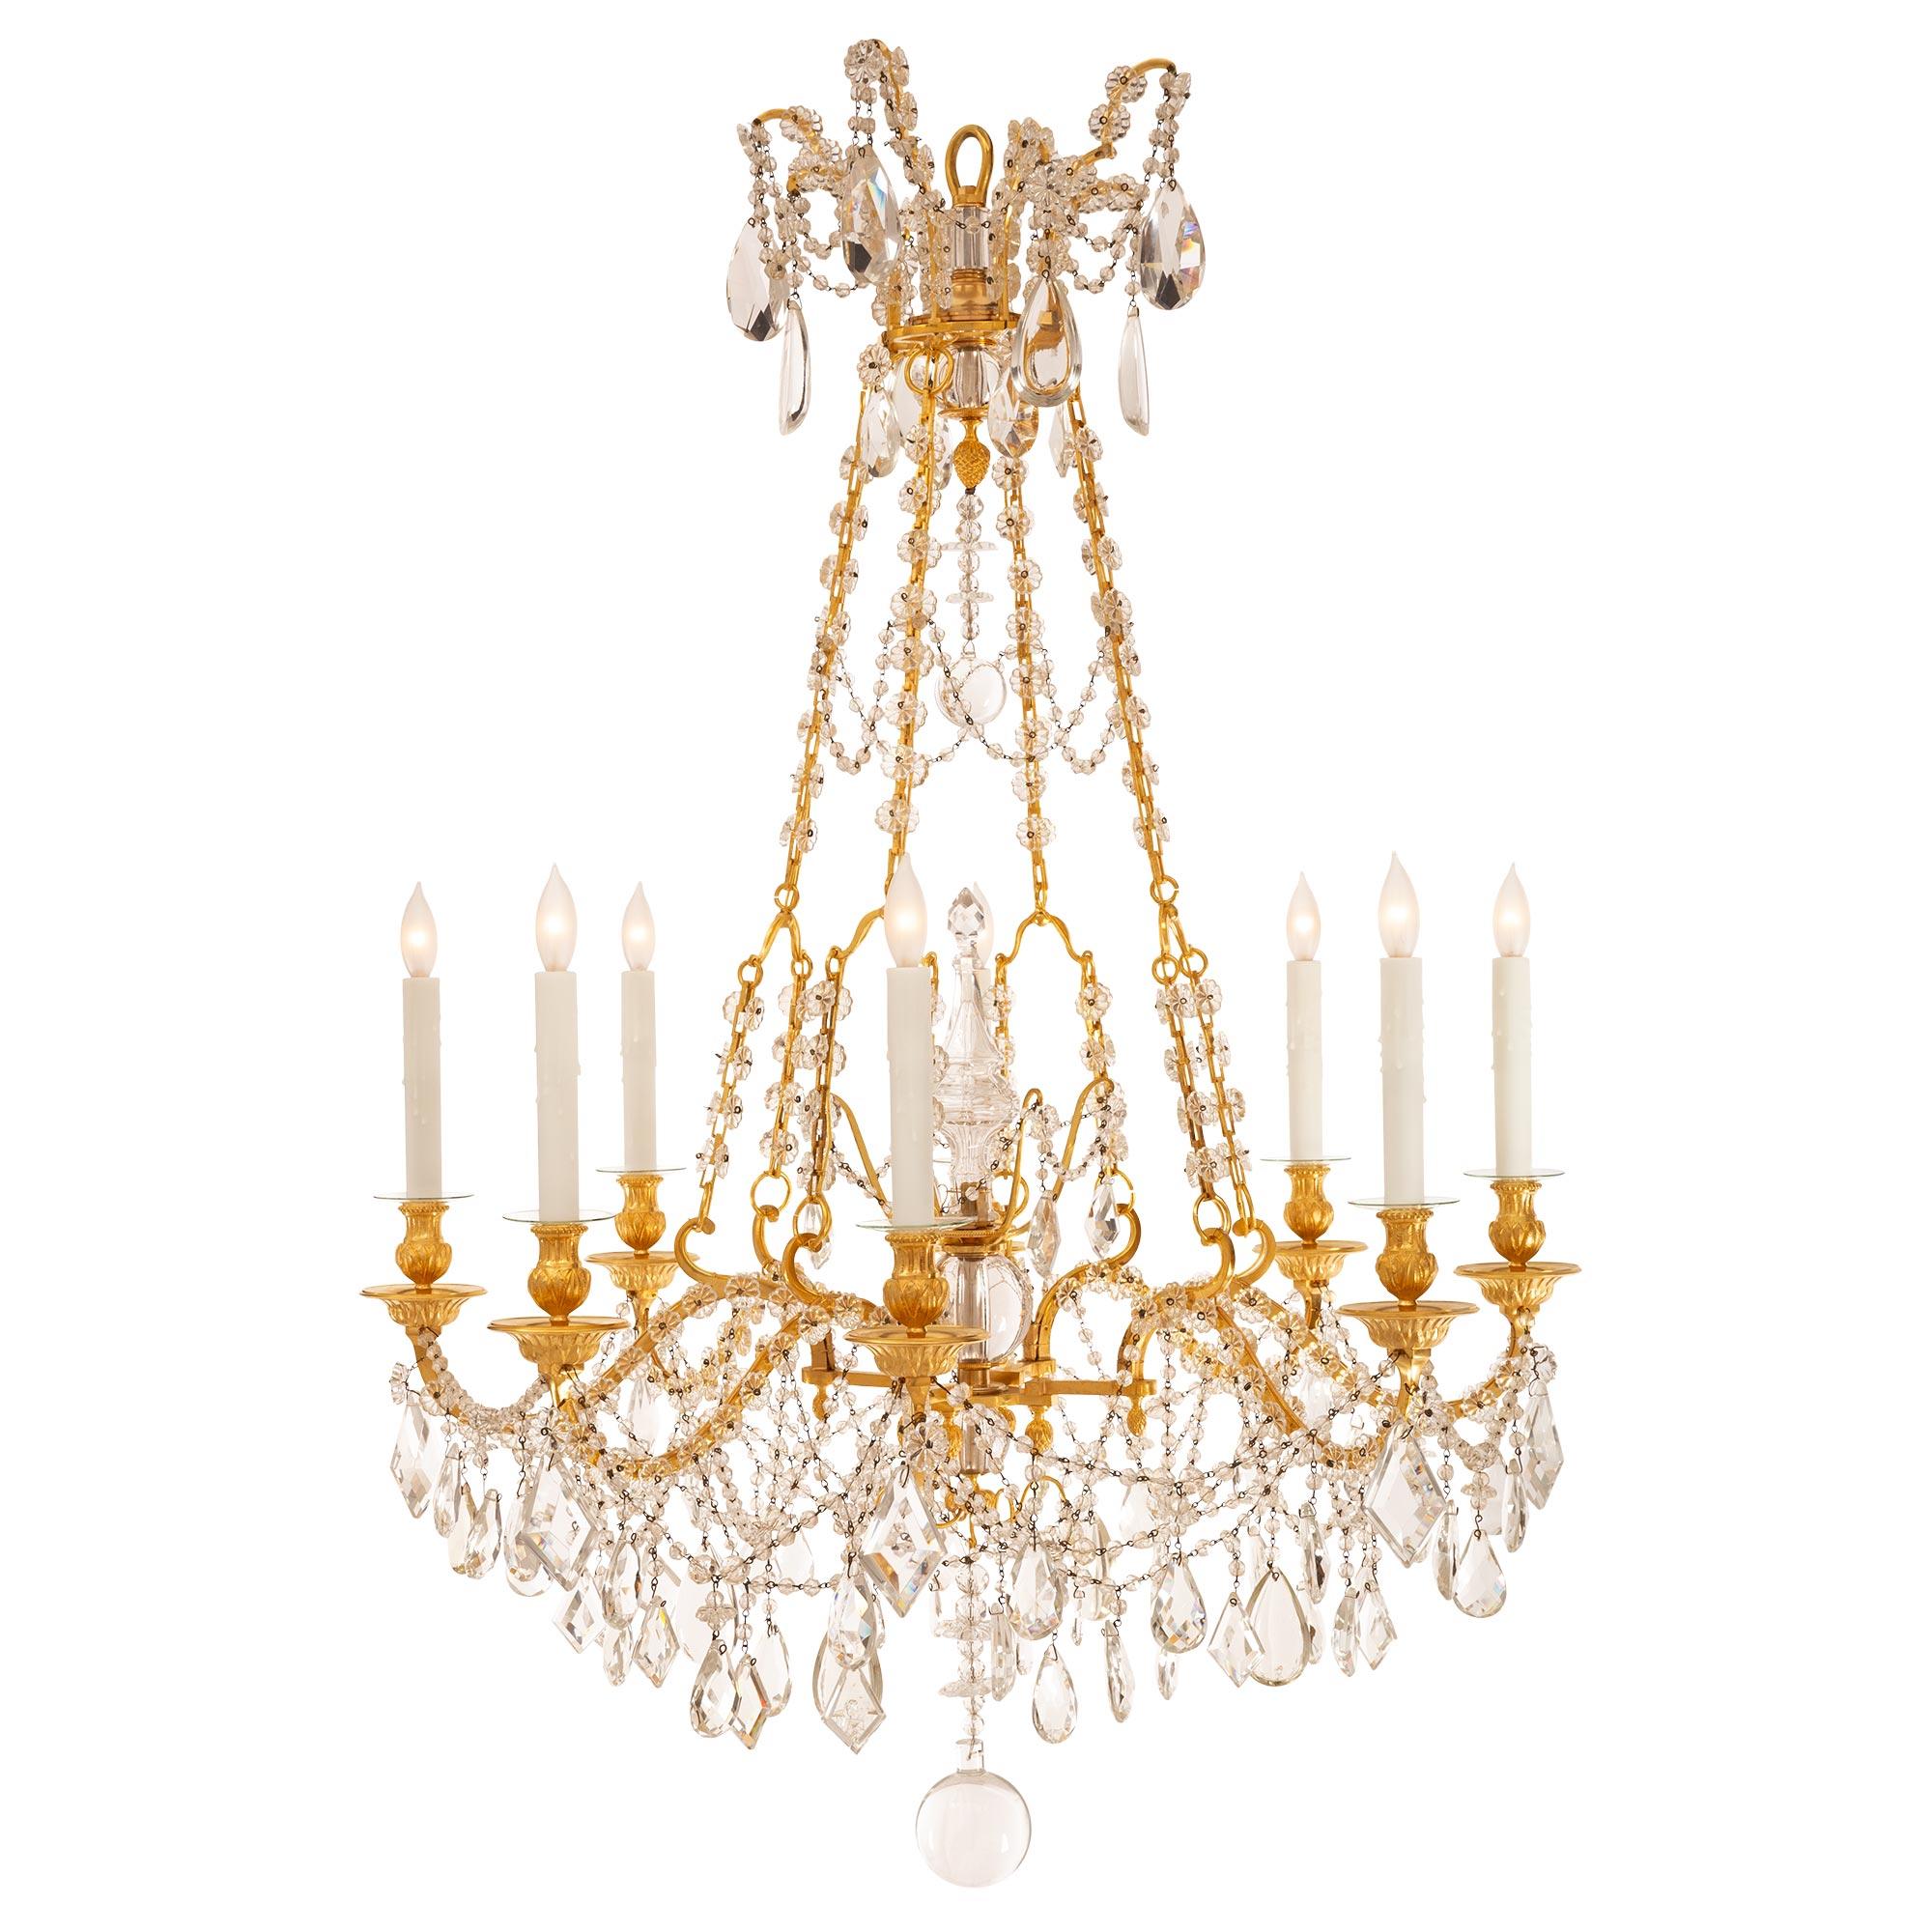 A stunning and extremely elegant pair of French 19th century Louis XVI st. ormolu and Baccarat crystal chandeliers from the collection of Charles Aznavour. Each Marie Antoinette st. eight arm chandelier is centered by a beautiful solid Baccarat